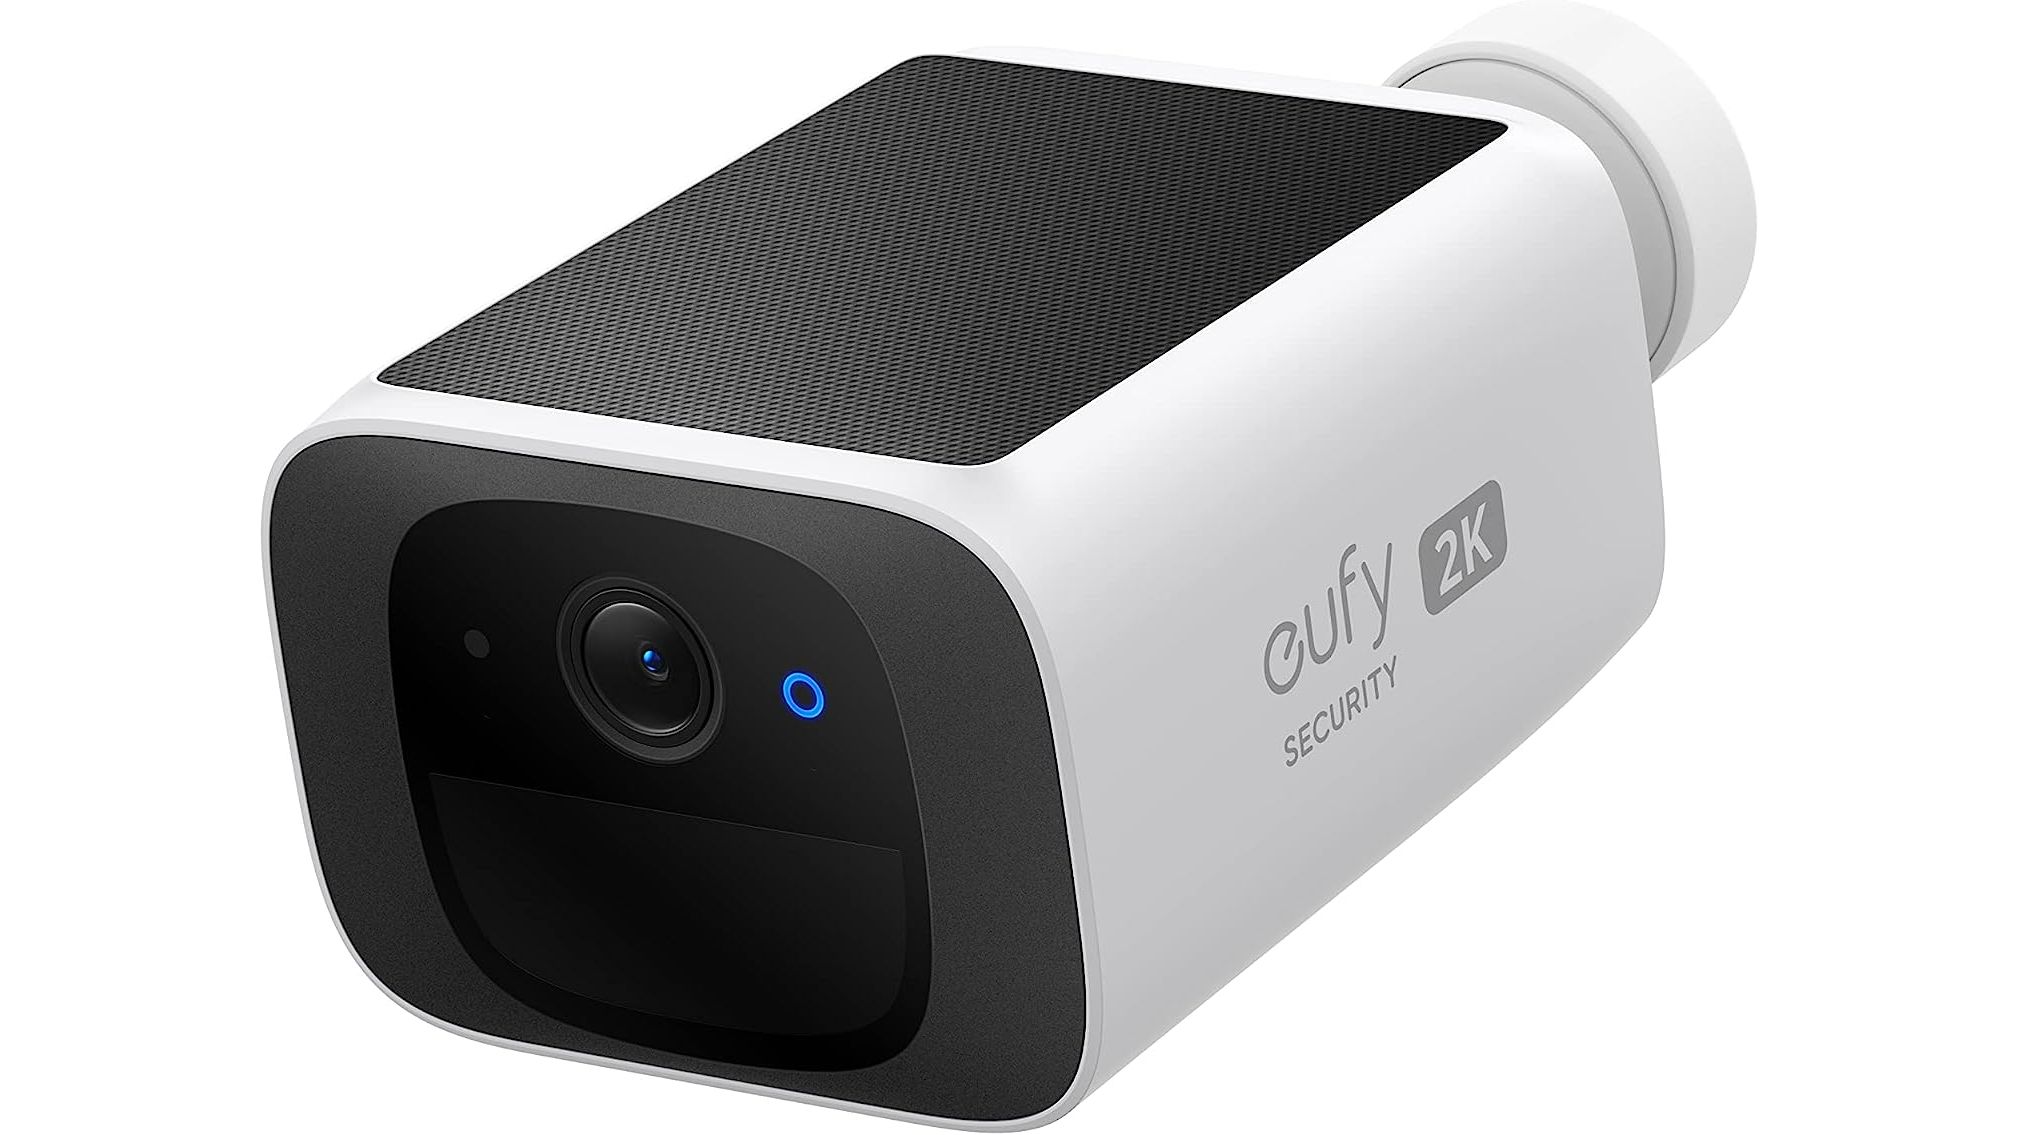 This bother-free $130 Eufy security camera is $70 this day